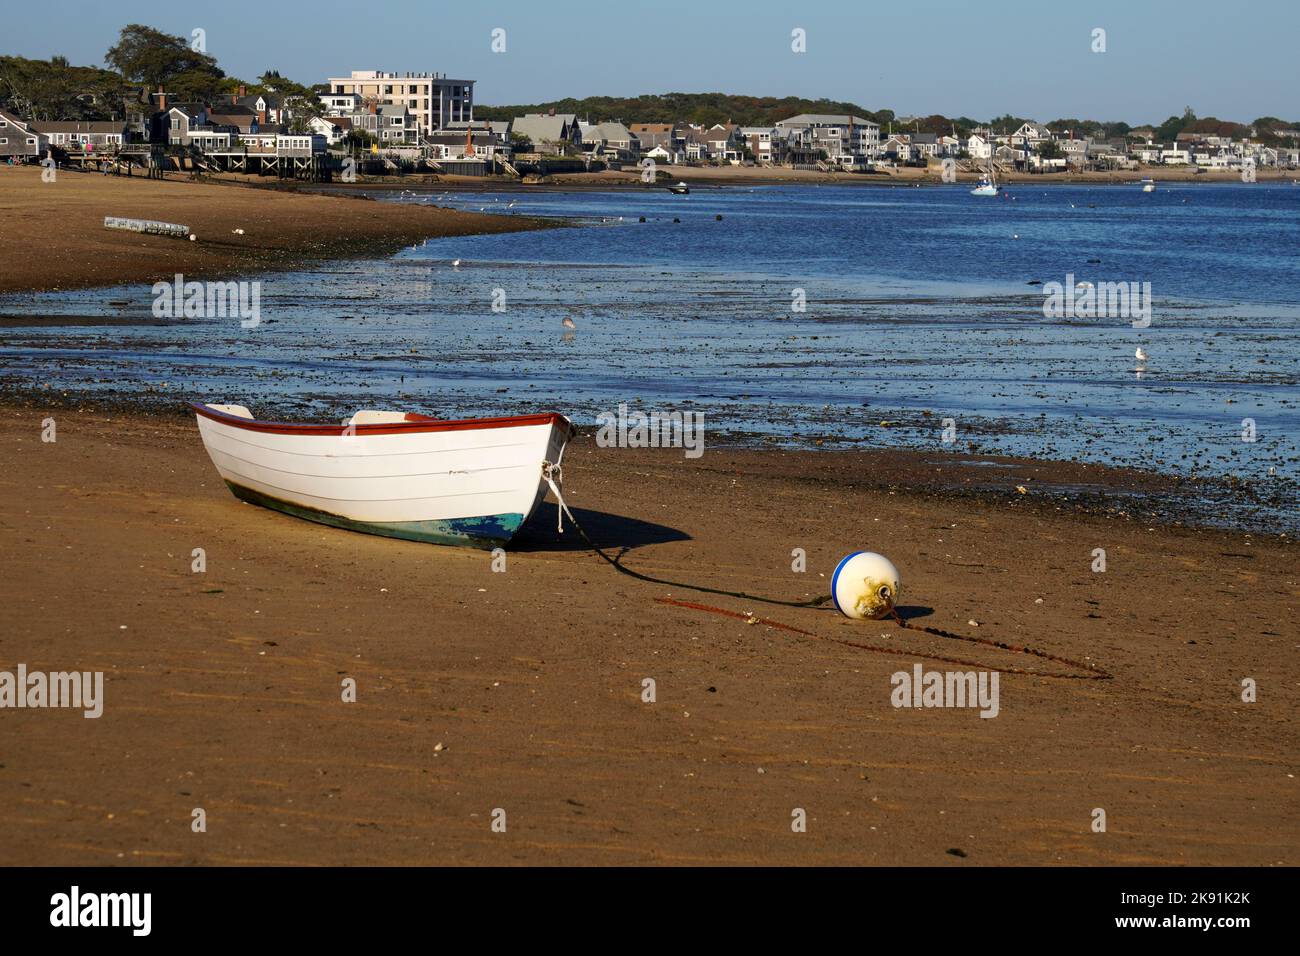 Row boat on the beach in Cape Cod Stock Photo